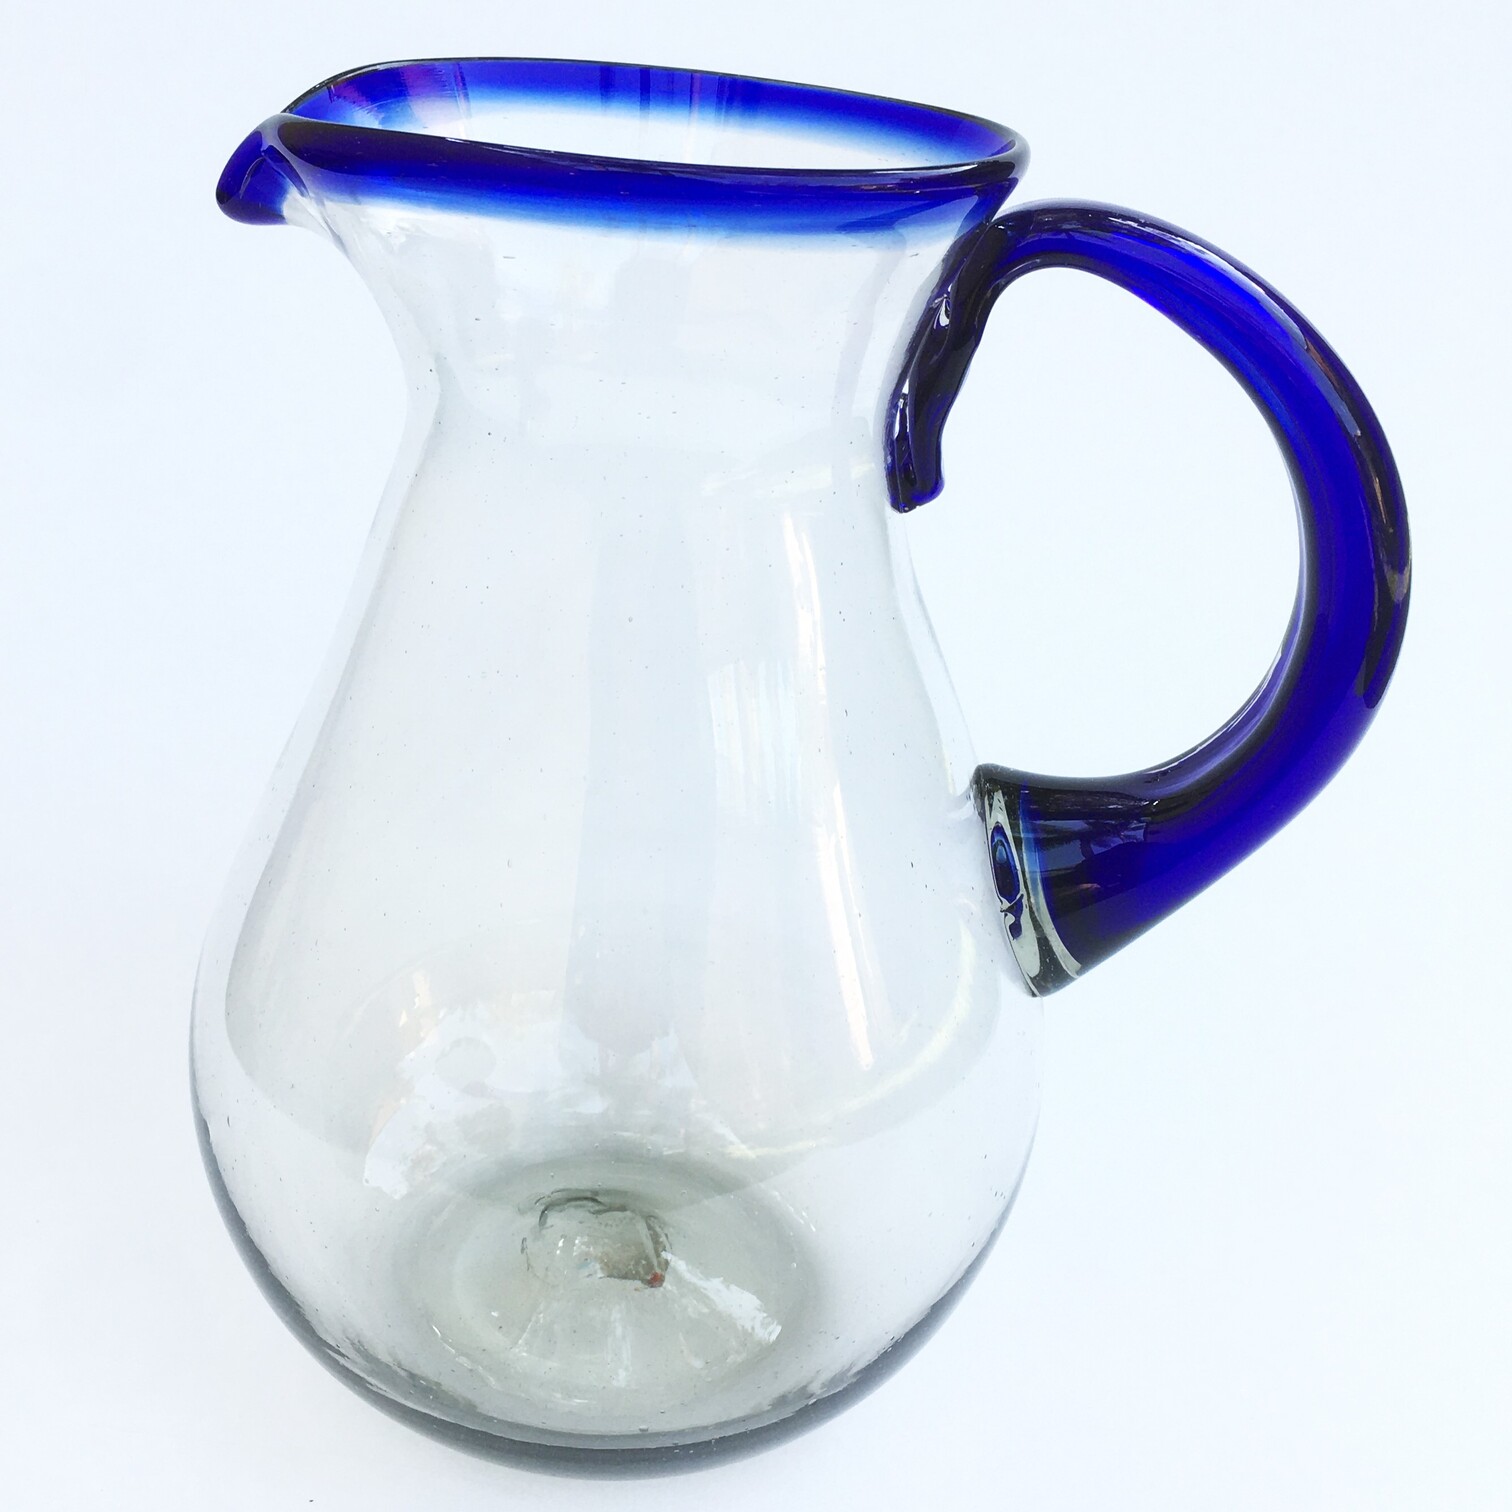 Colored Rim Glassware / Cobalt Blue Rim Tall Pear Pitcher / This classic pitcher is perfect for pouring out all kinds of refreshing drinks.